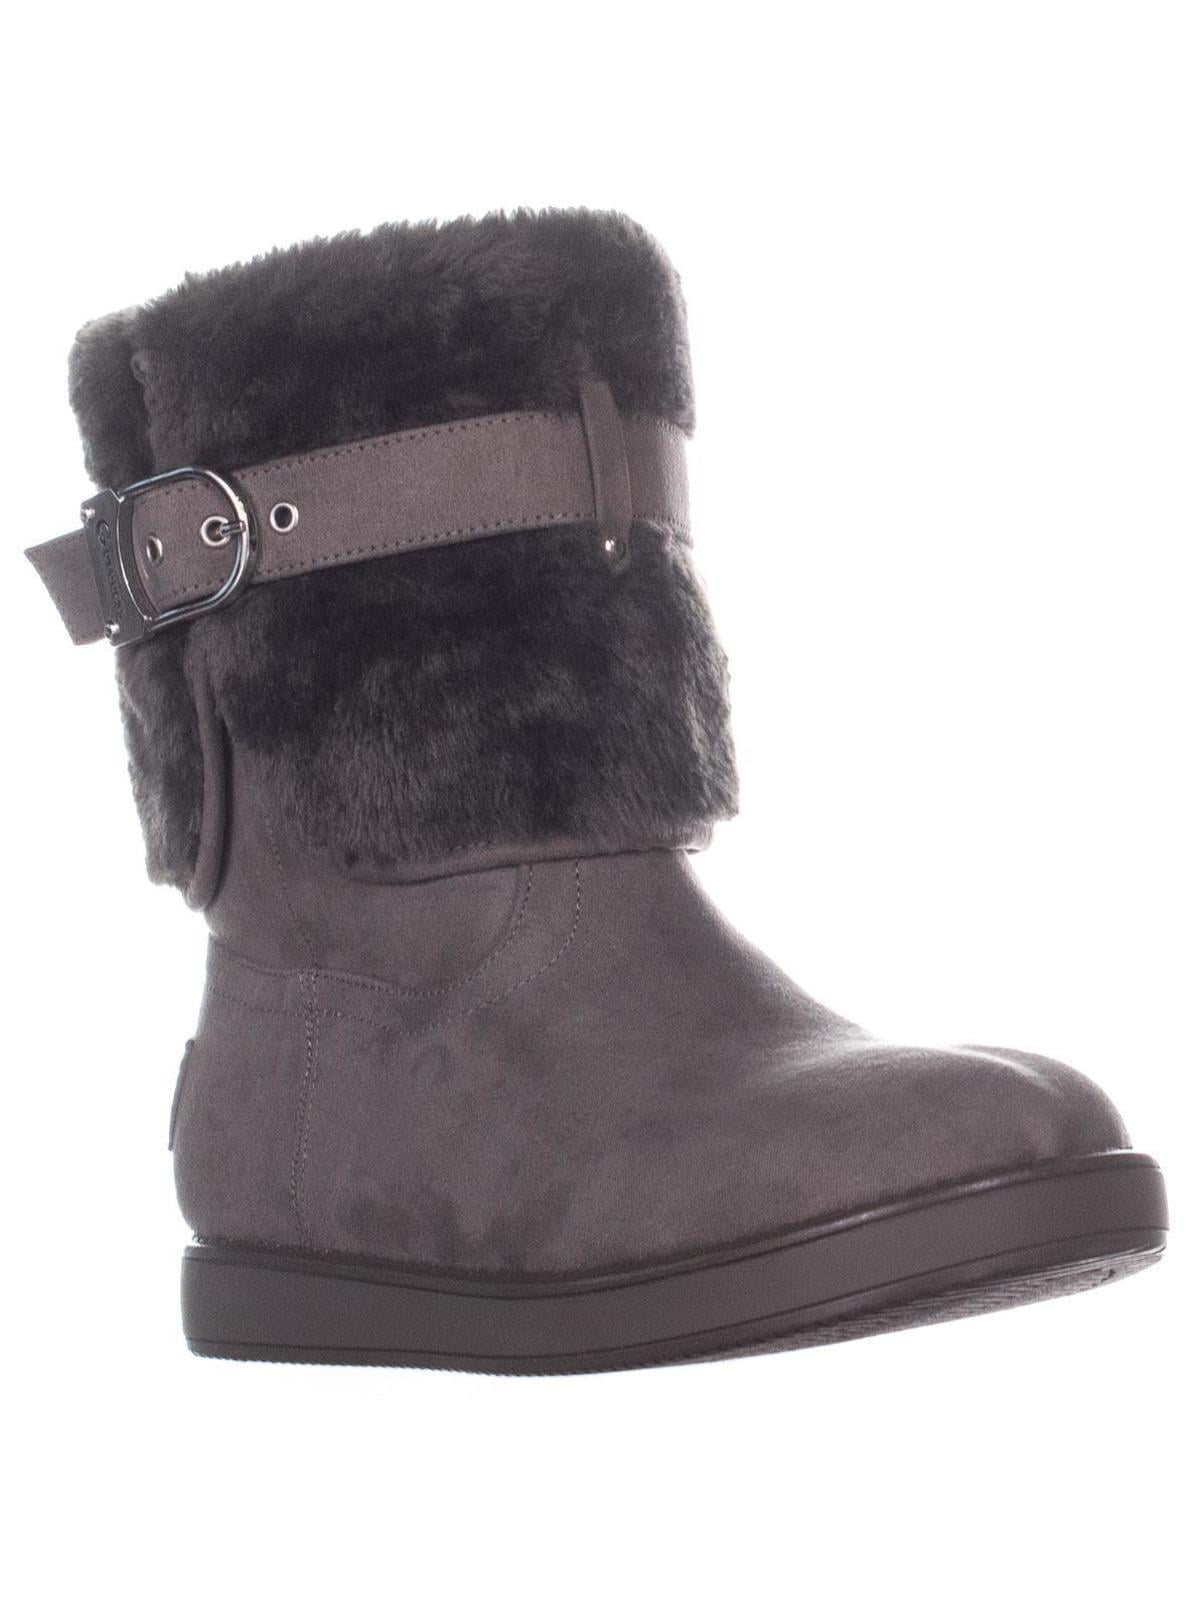 G By Guess Womens Aussie Closed Toe Ankle Cold Weather Boots Black Size 7.5